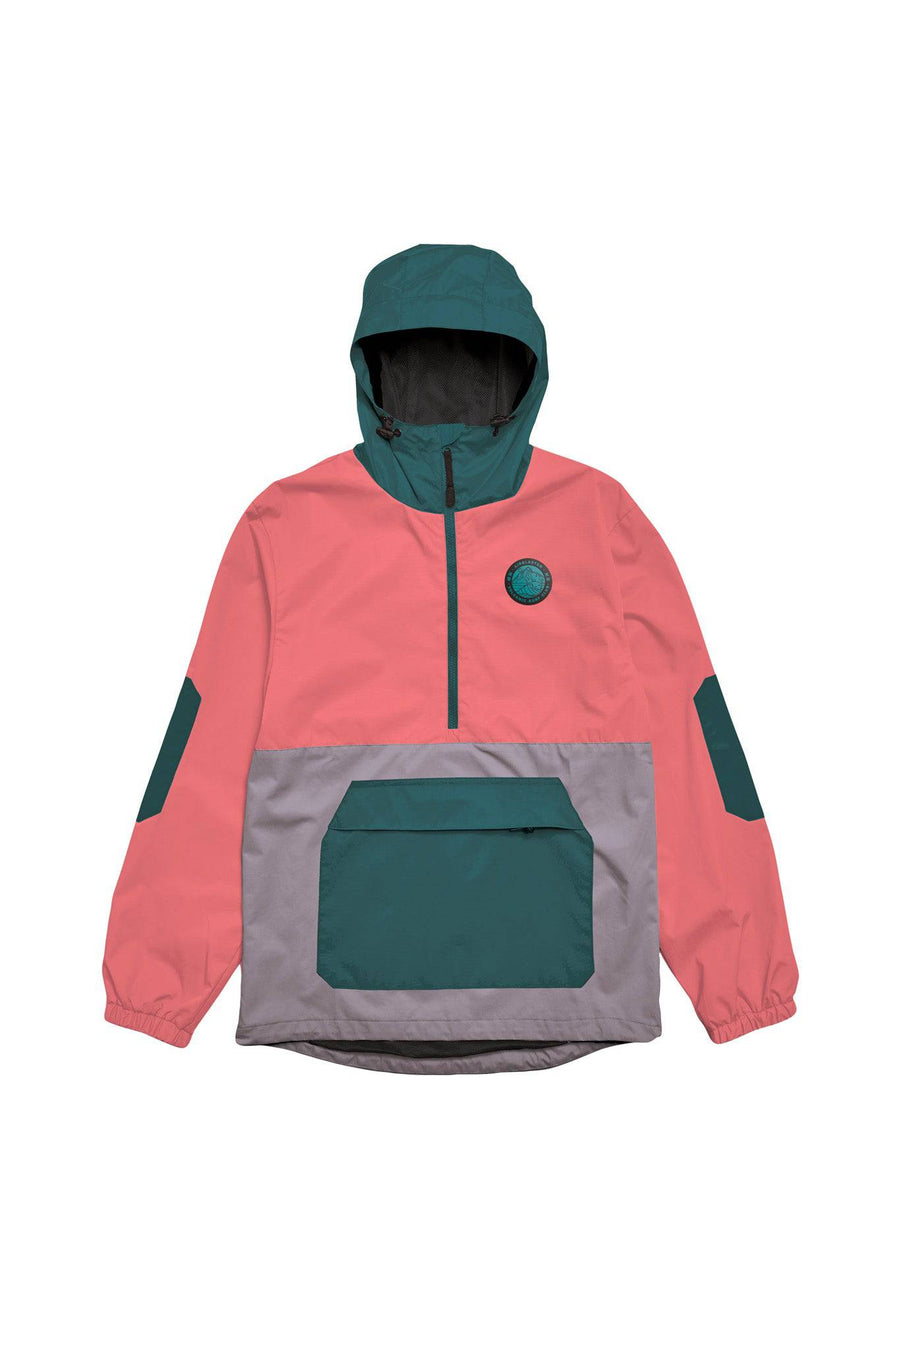 Airblaster Breakwinder Packable Pullover Jacket in Hot Coral and Spruce 2023